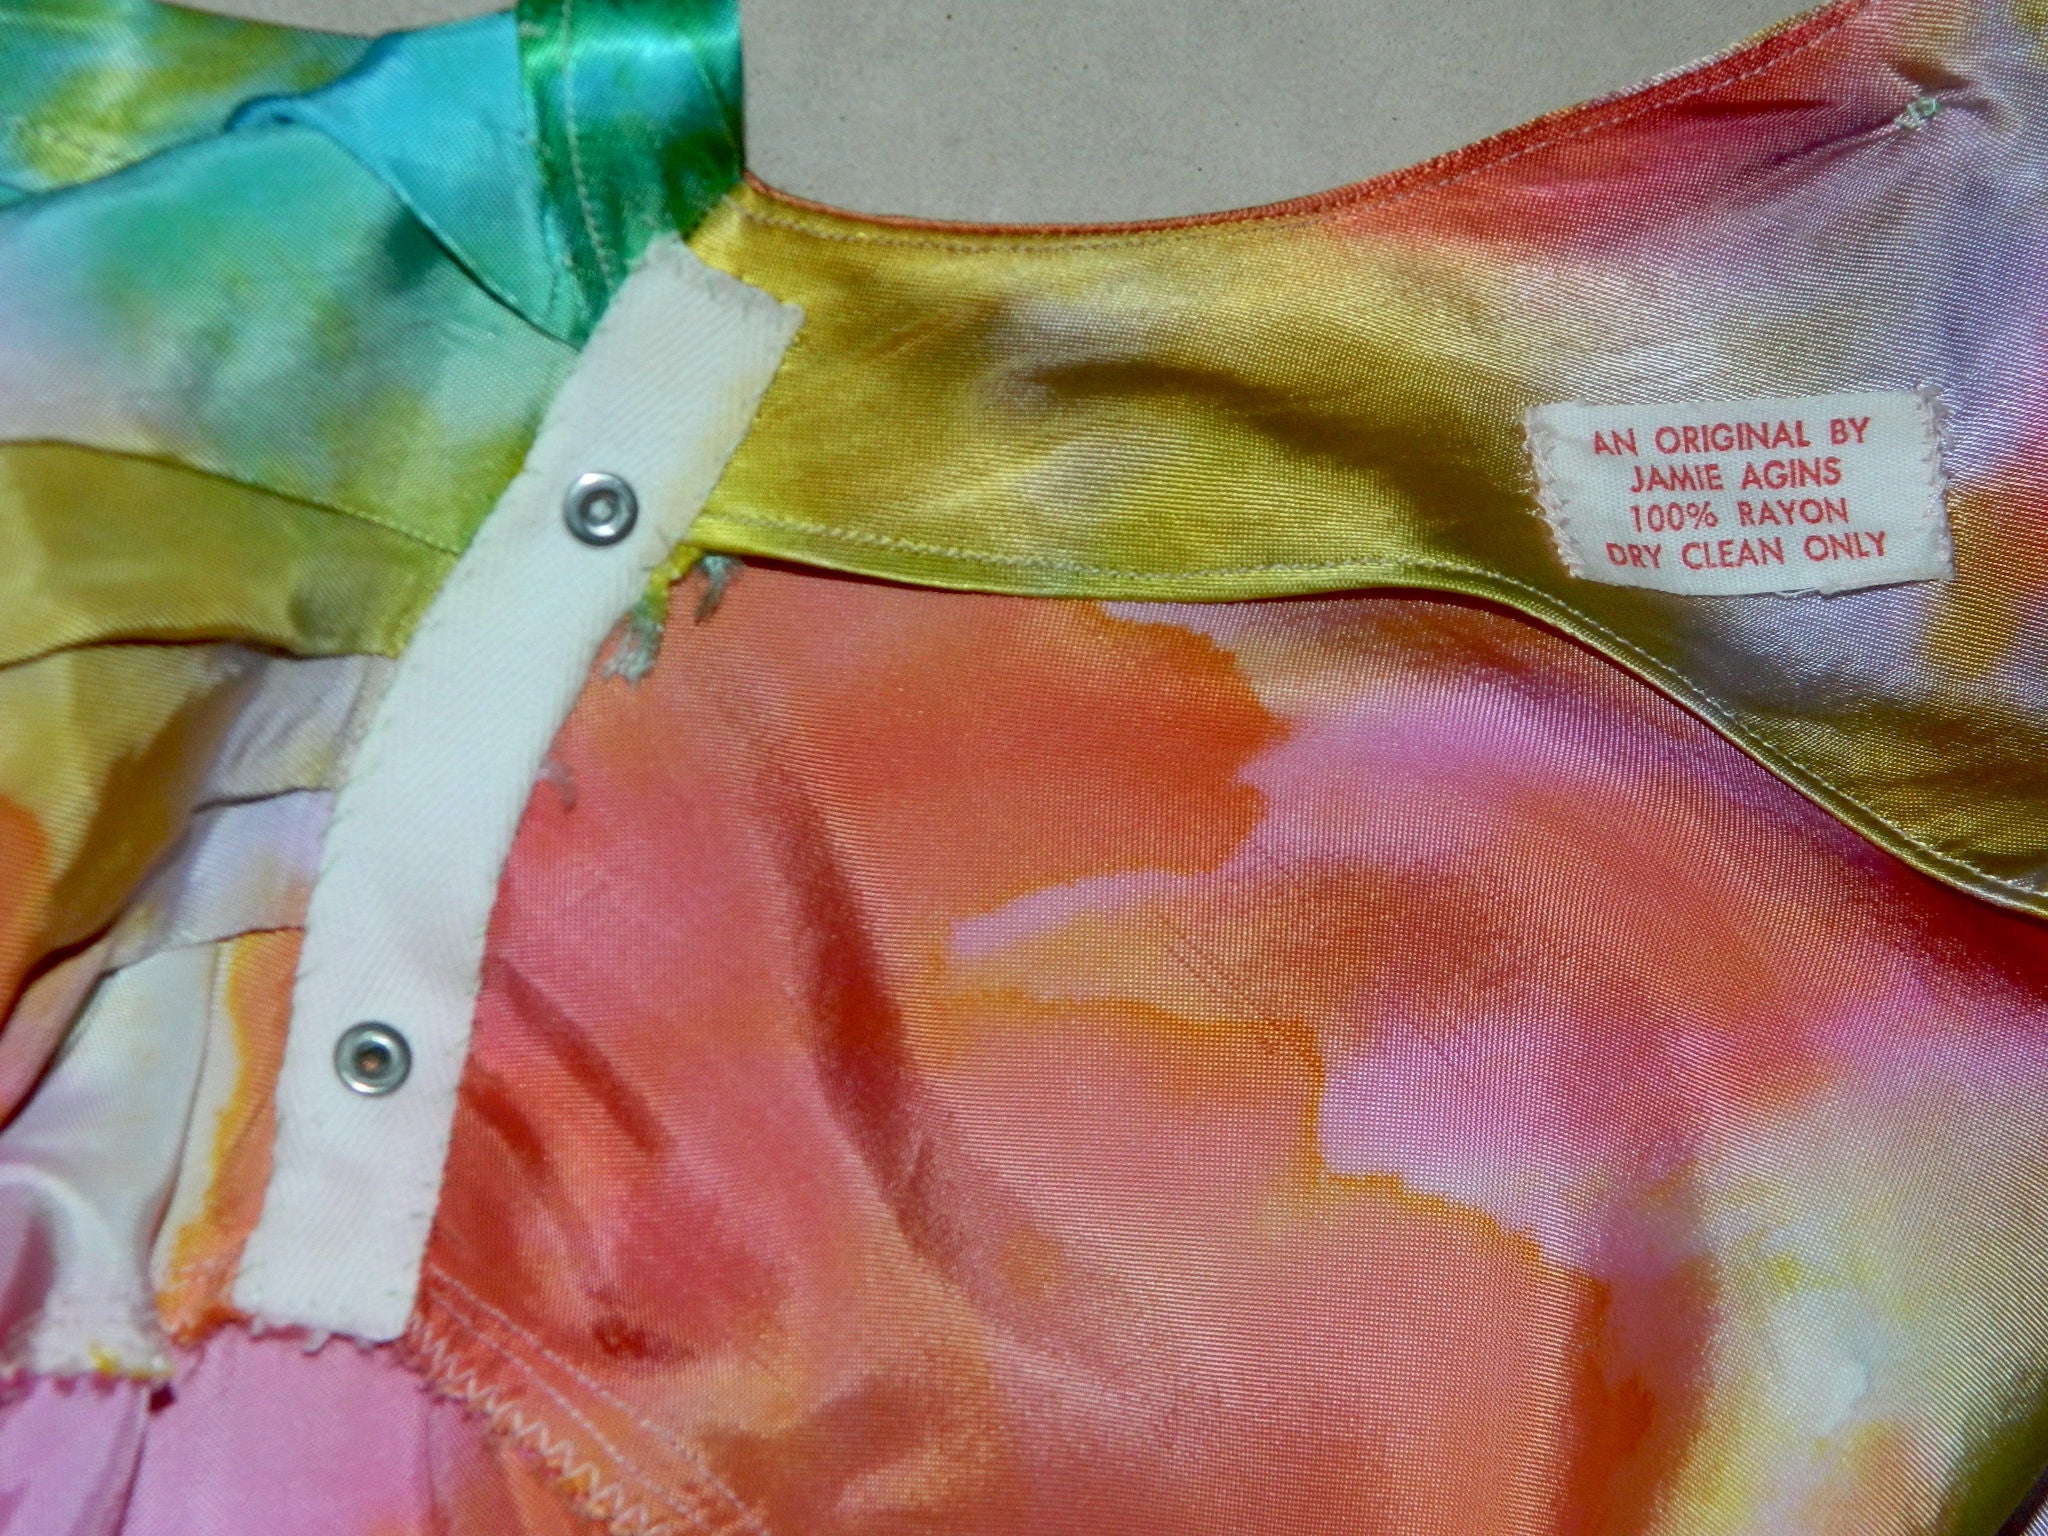 vintage 1970s satin rainbow blouse / hand dyed rayon / button back OOAK